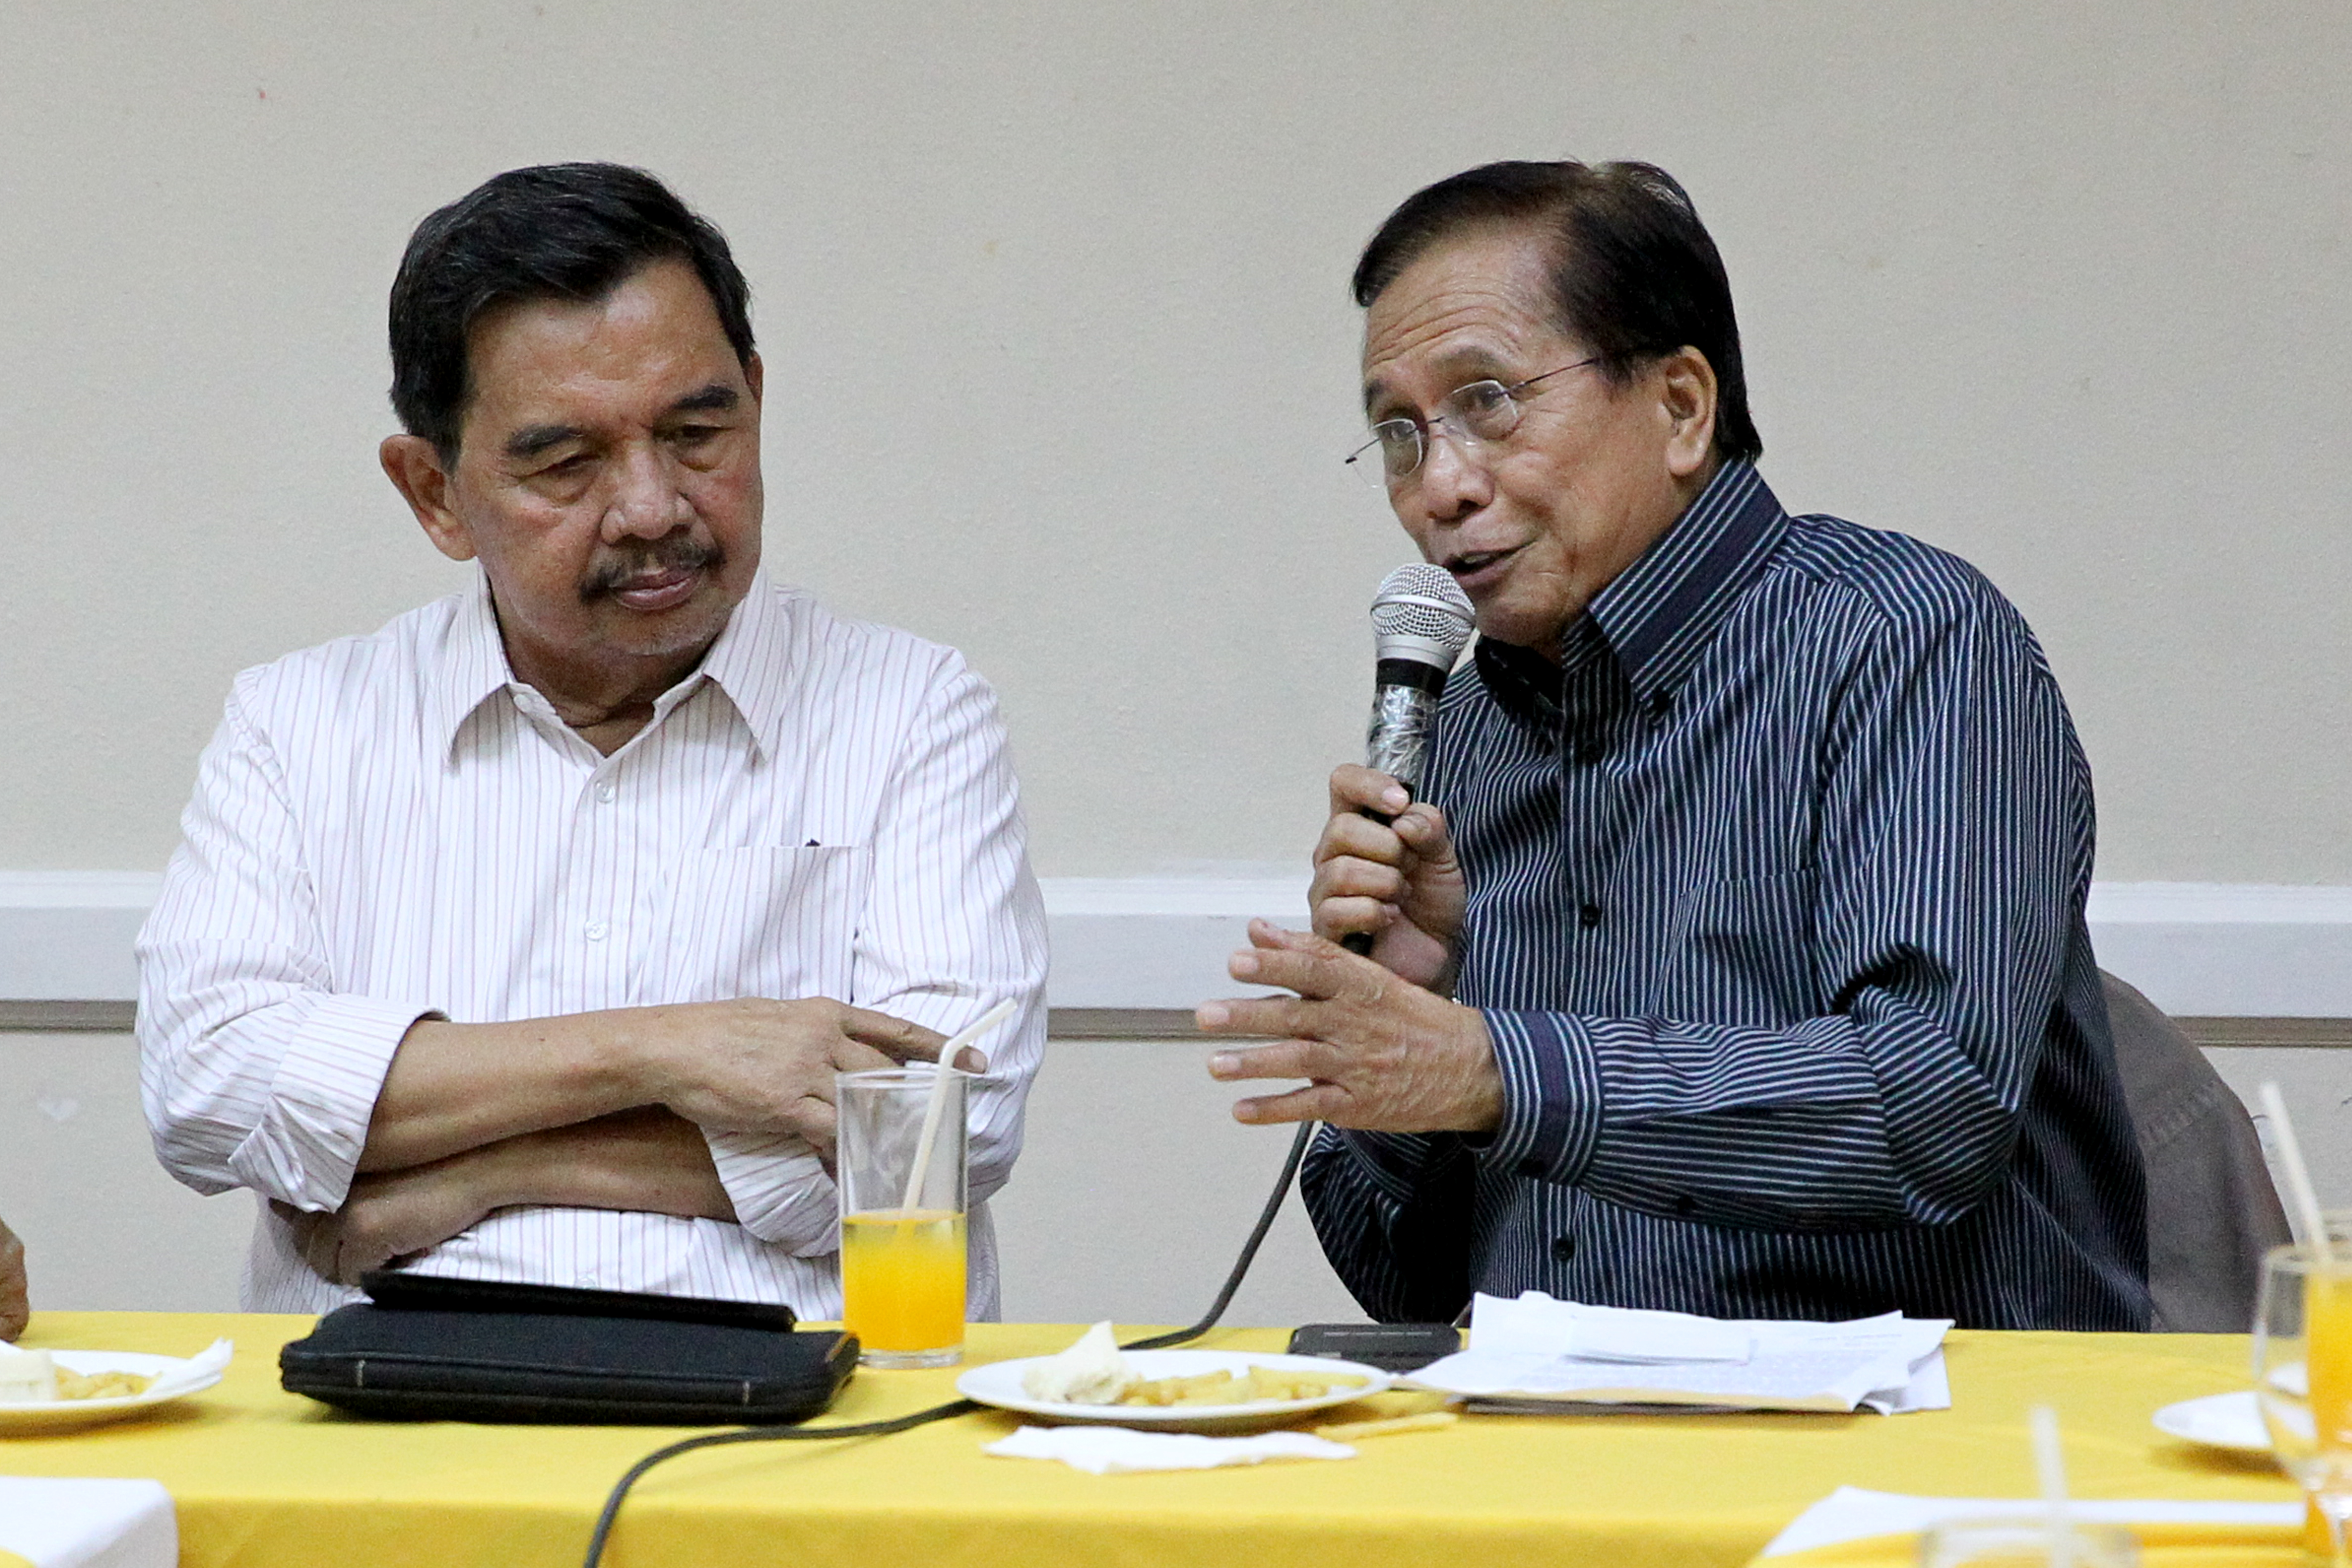 Presidential Peace Adviser Jesus Dureza speaks with former Cotabato mayor and a Moro National Liberation Front (MNLF) leader Muslimin Sema about a possible merger between the MNLF and Moro Islamic Liberation Front (MILF) during their meeting at the Apo View Hotel in Davao City on Tuesday, August 9, 2016. KARL NORMAN ALONZO/PPD